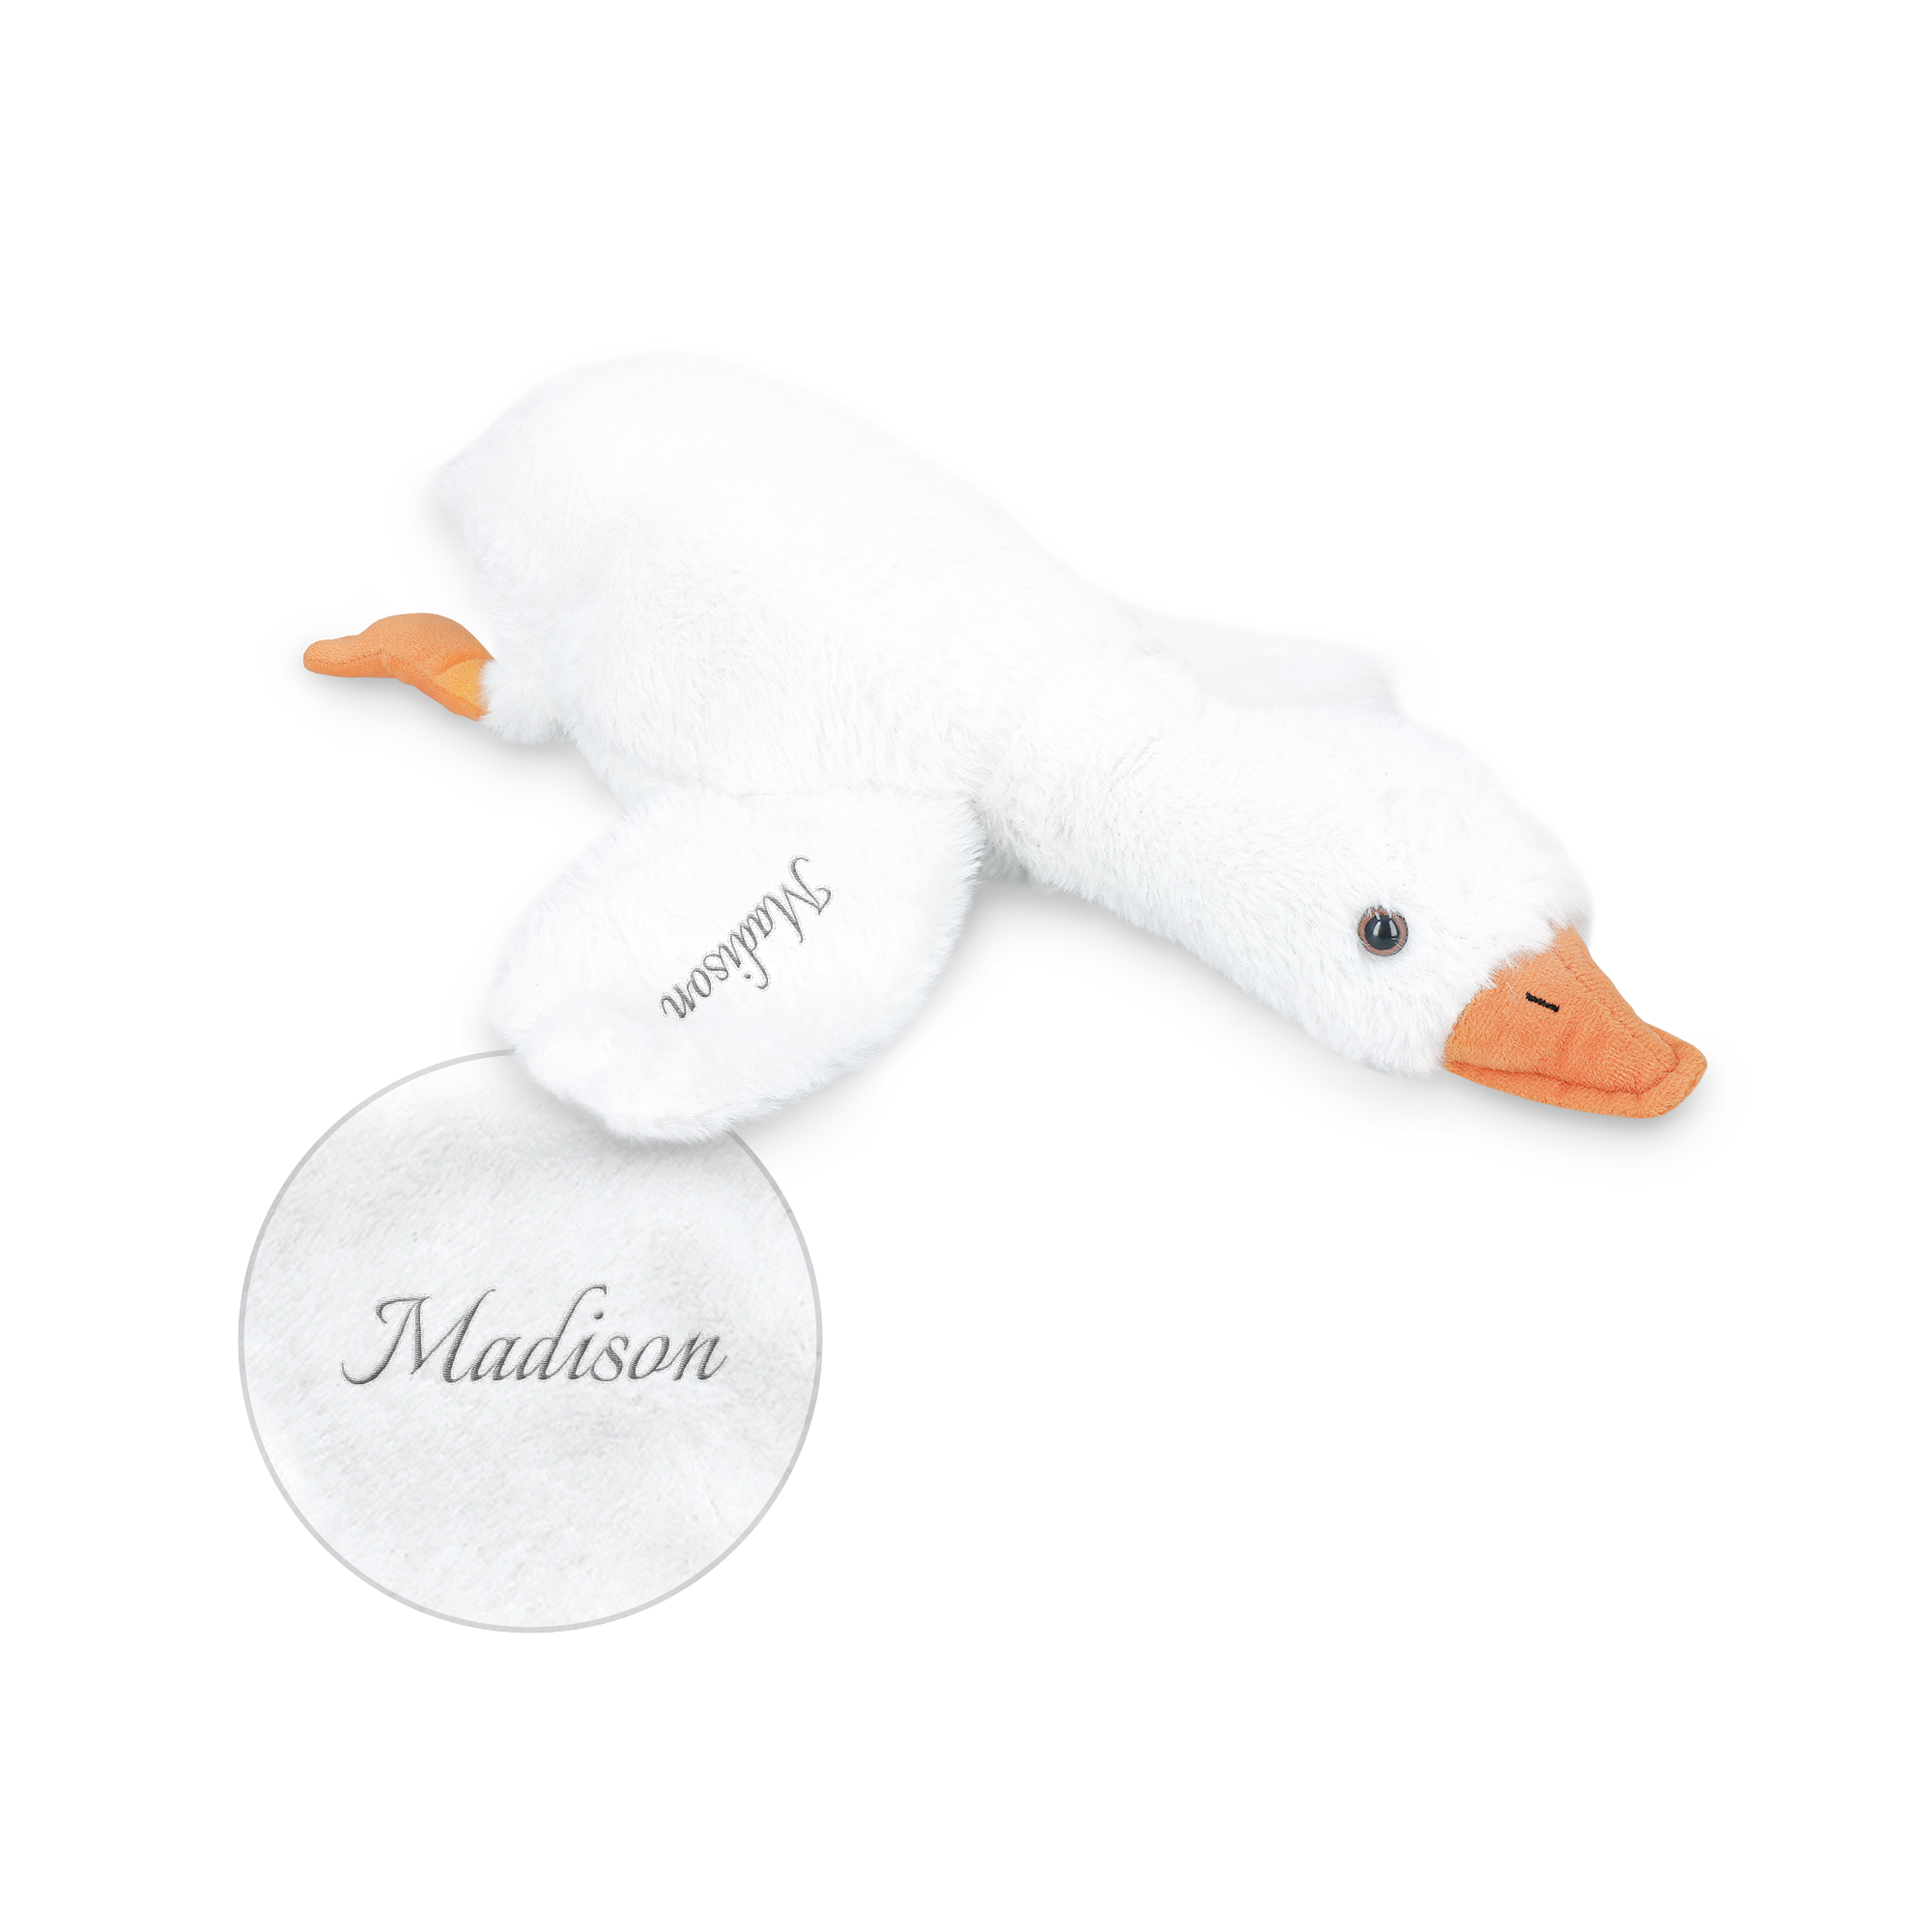 Personalised cuddly toy - Goose - 47 cm